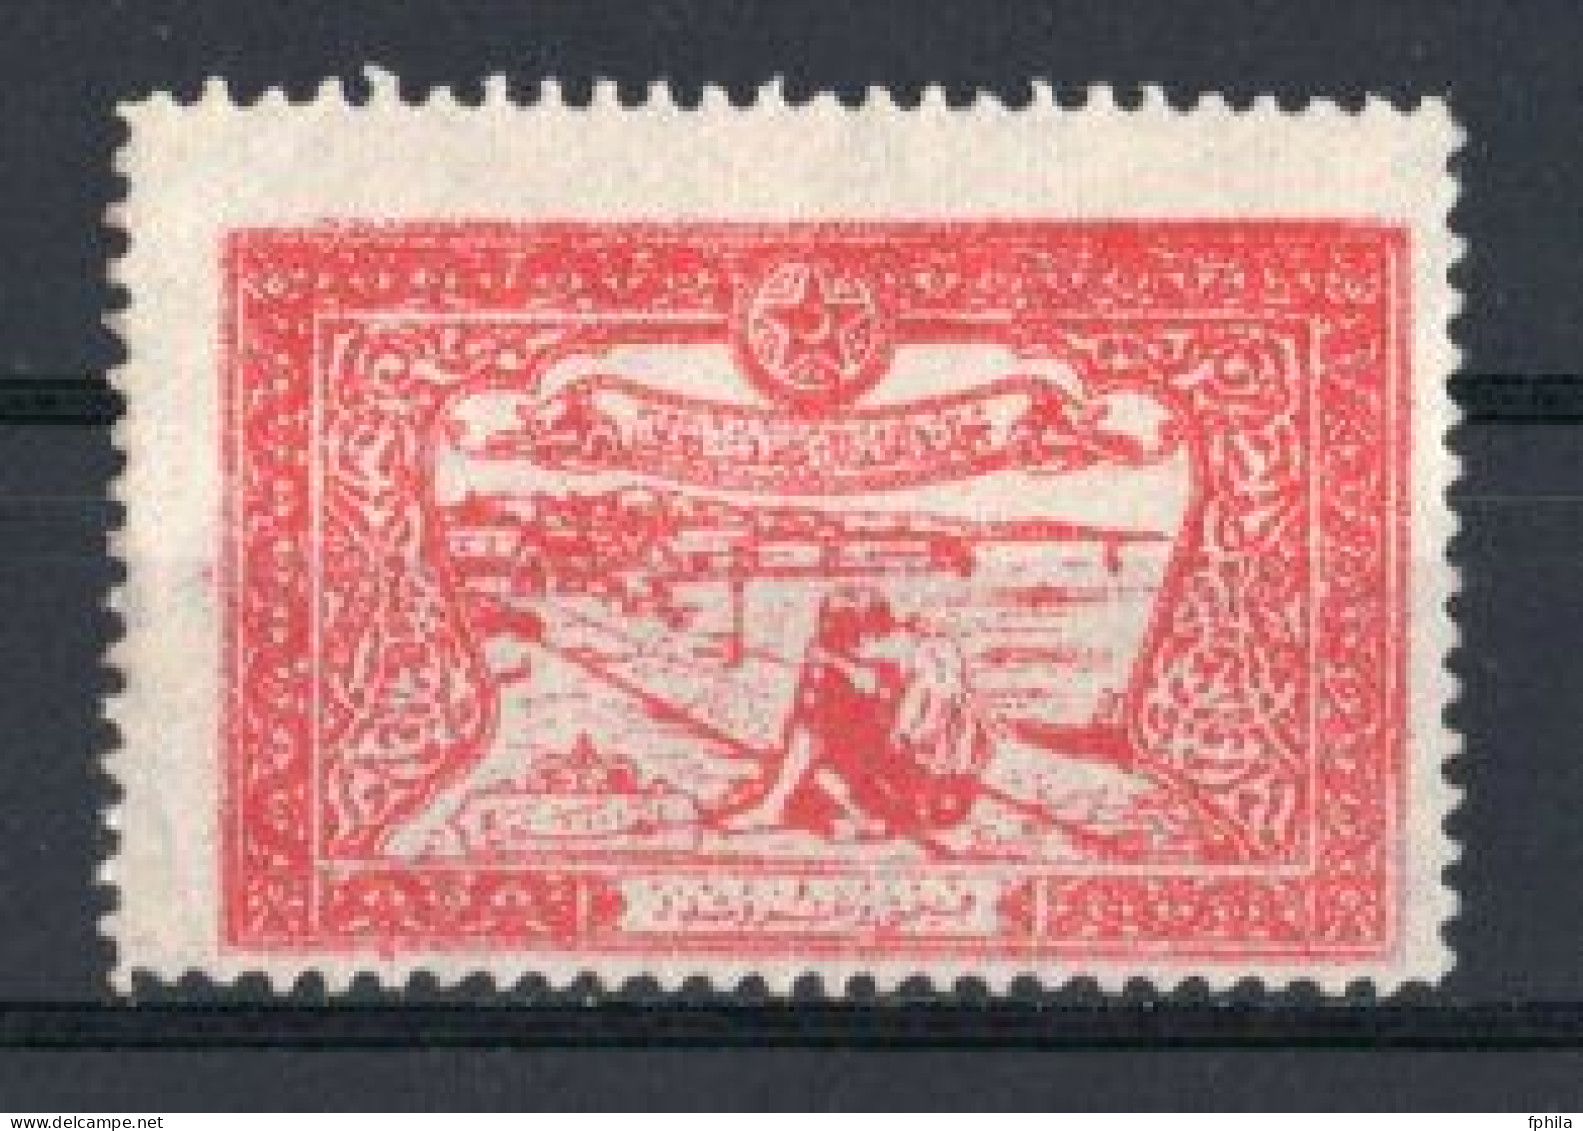 1923 TURKEY STAMP IN AID OF THE TURKISH SOCIETY FOR THE PROTECTION OF CHILDREN MH * - Timbres De Bienfaisance